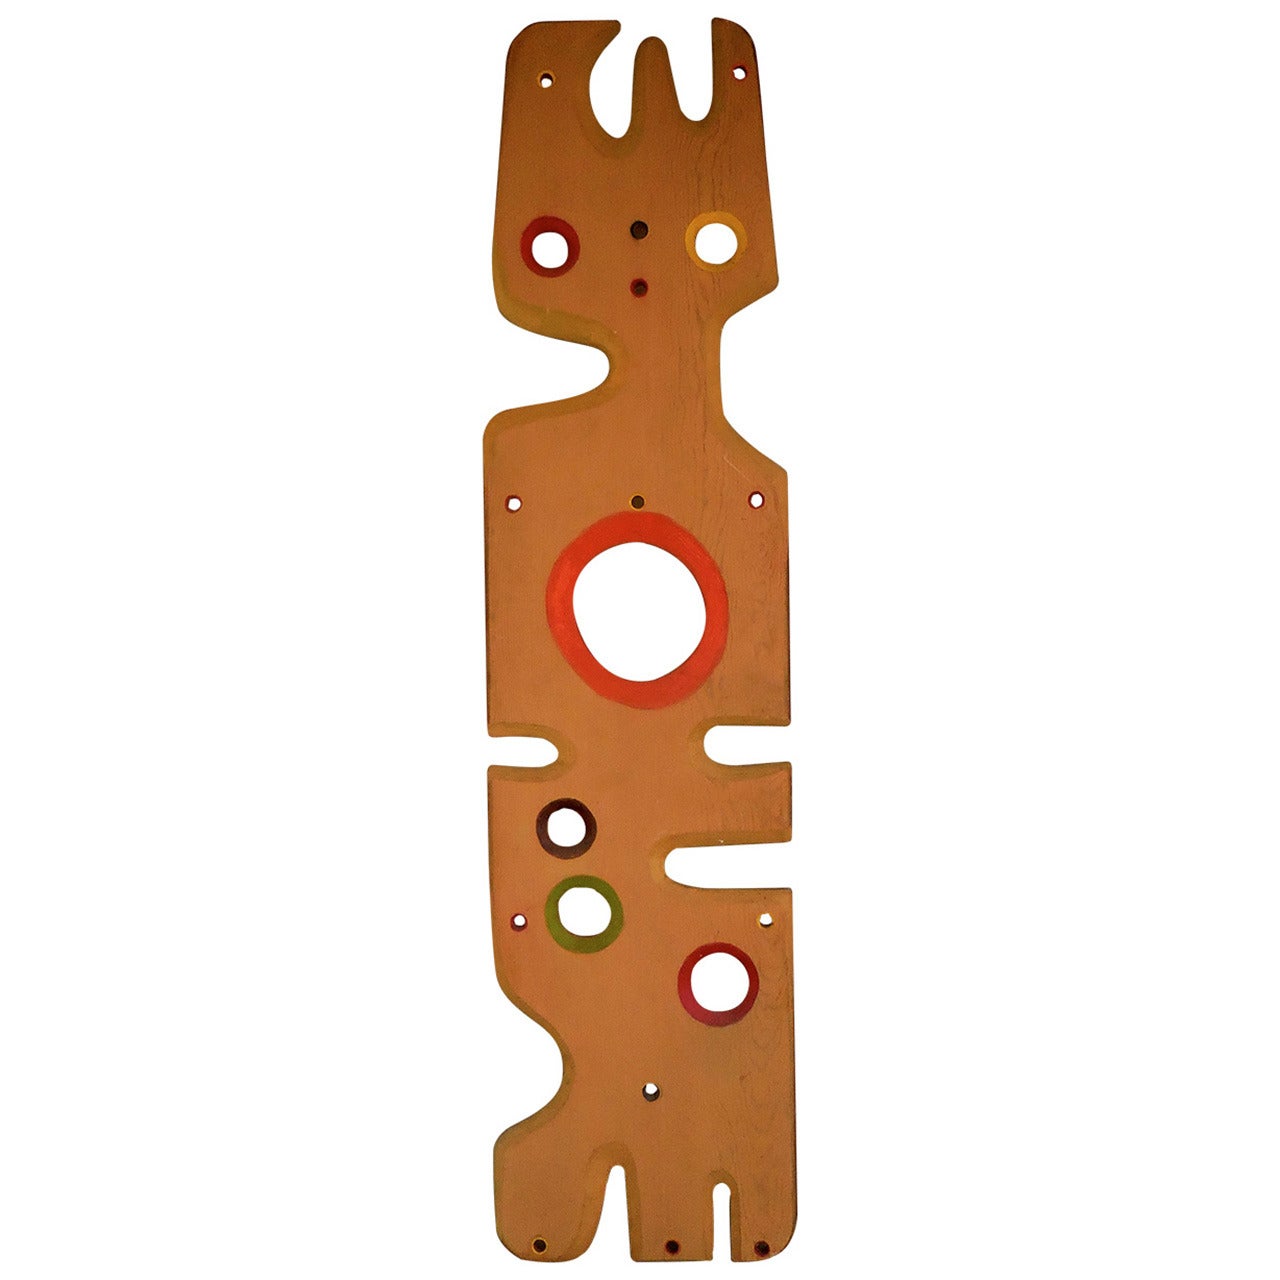 Totemic Mid-20th Century Hand-Carved and Polychromed Wood Sculpture